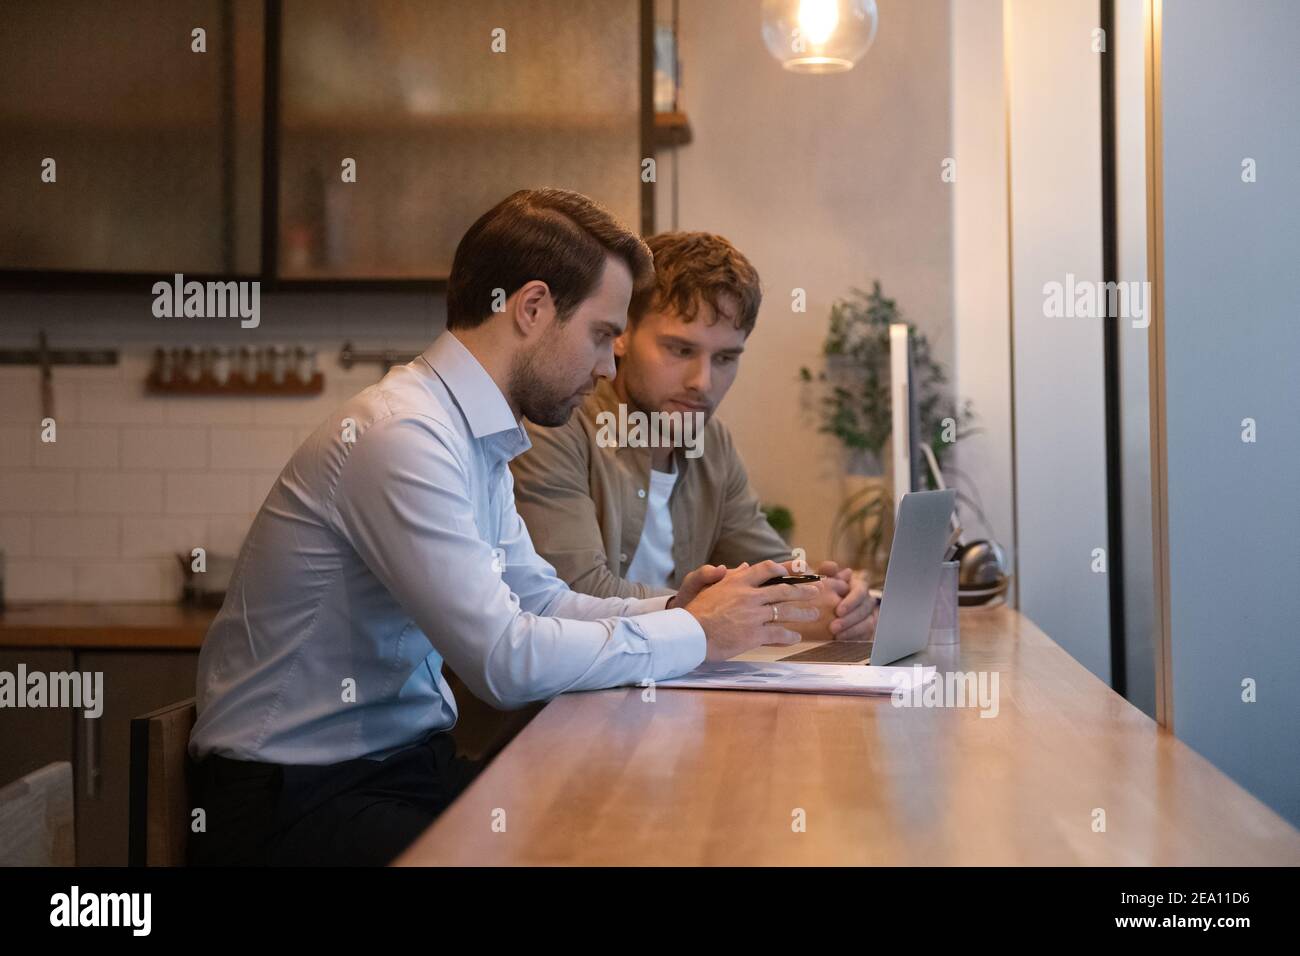 Young man analyse electronic report mistakes with skilled male colleague Stock Photo